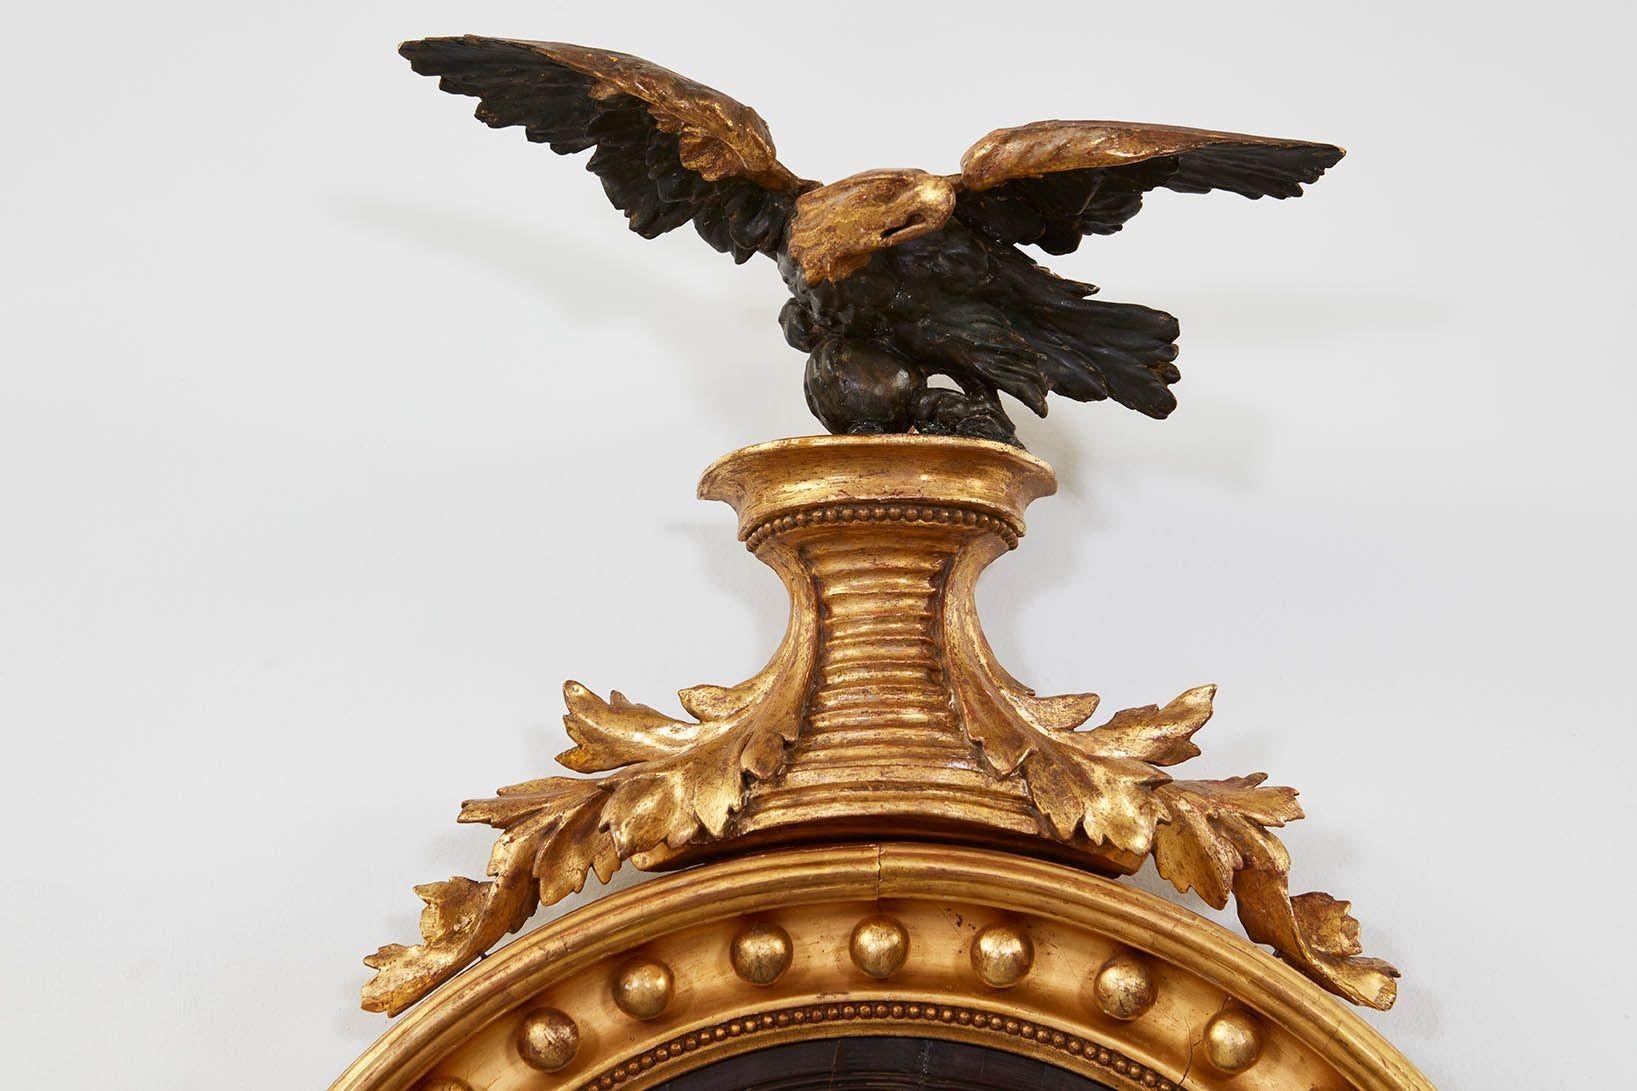 Fine Regency giltwood convex mirror, the ebonized eagle with gilt head and shoulders standing on ribbed plinth with acanthus leaf supports, the turned frame with gilt balls and beaded molding and ebonized slip surrounding original convex mercury